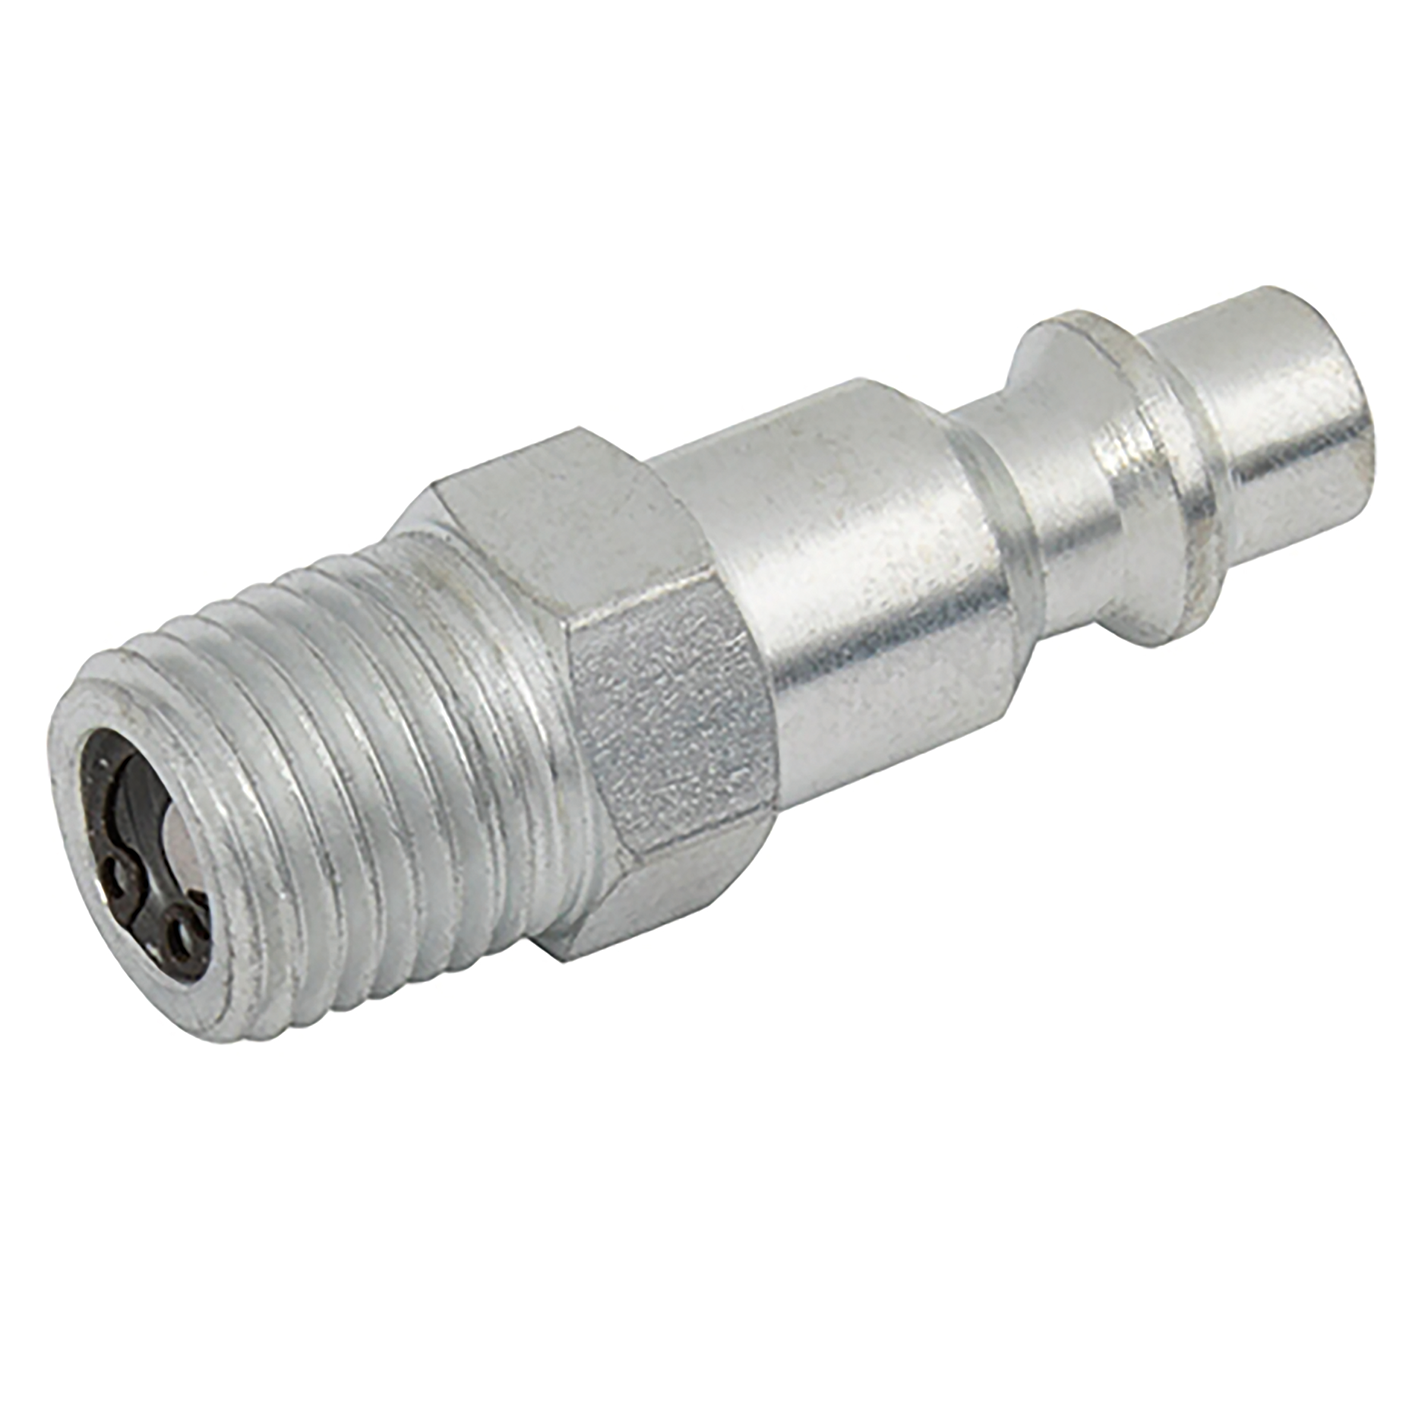 1/4" BSPT Male BE-23 ISO Safety Plug